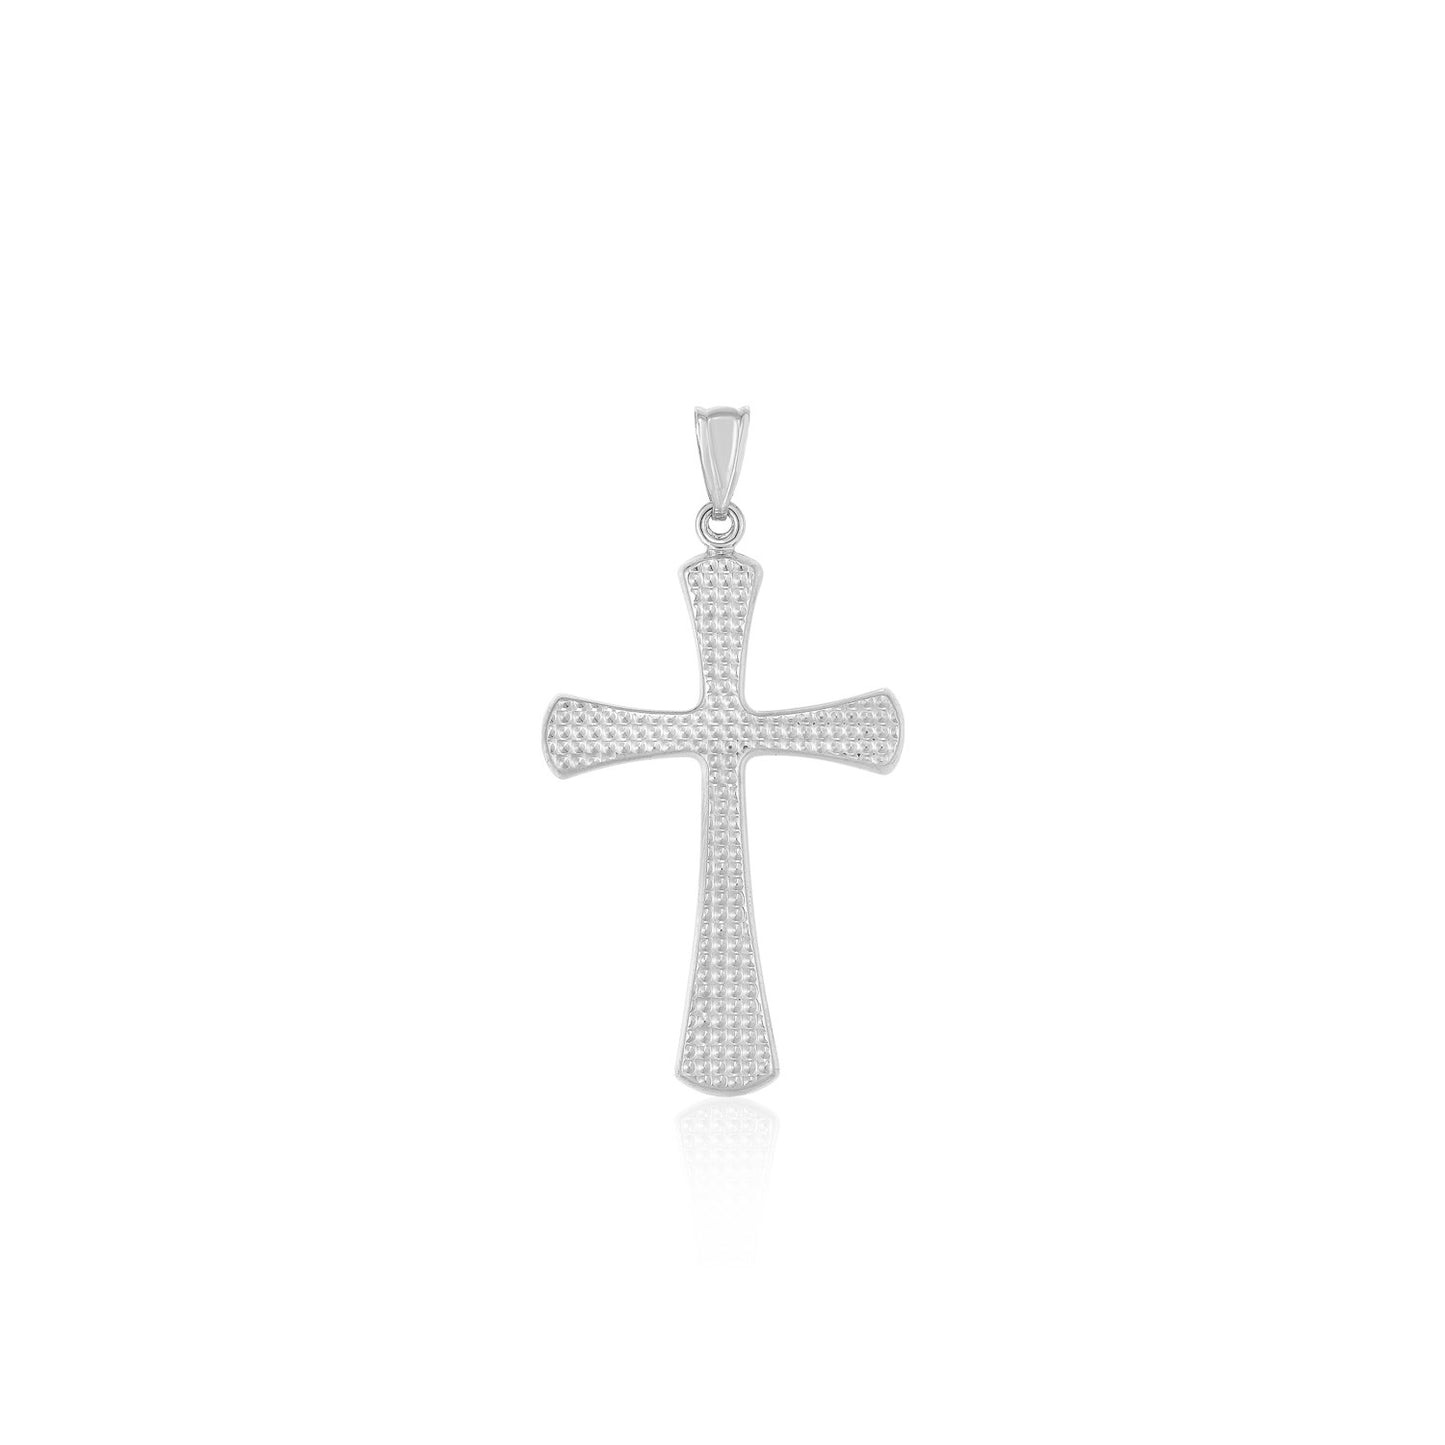 14k White Gold Cross Pendant with Beaded Texture